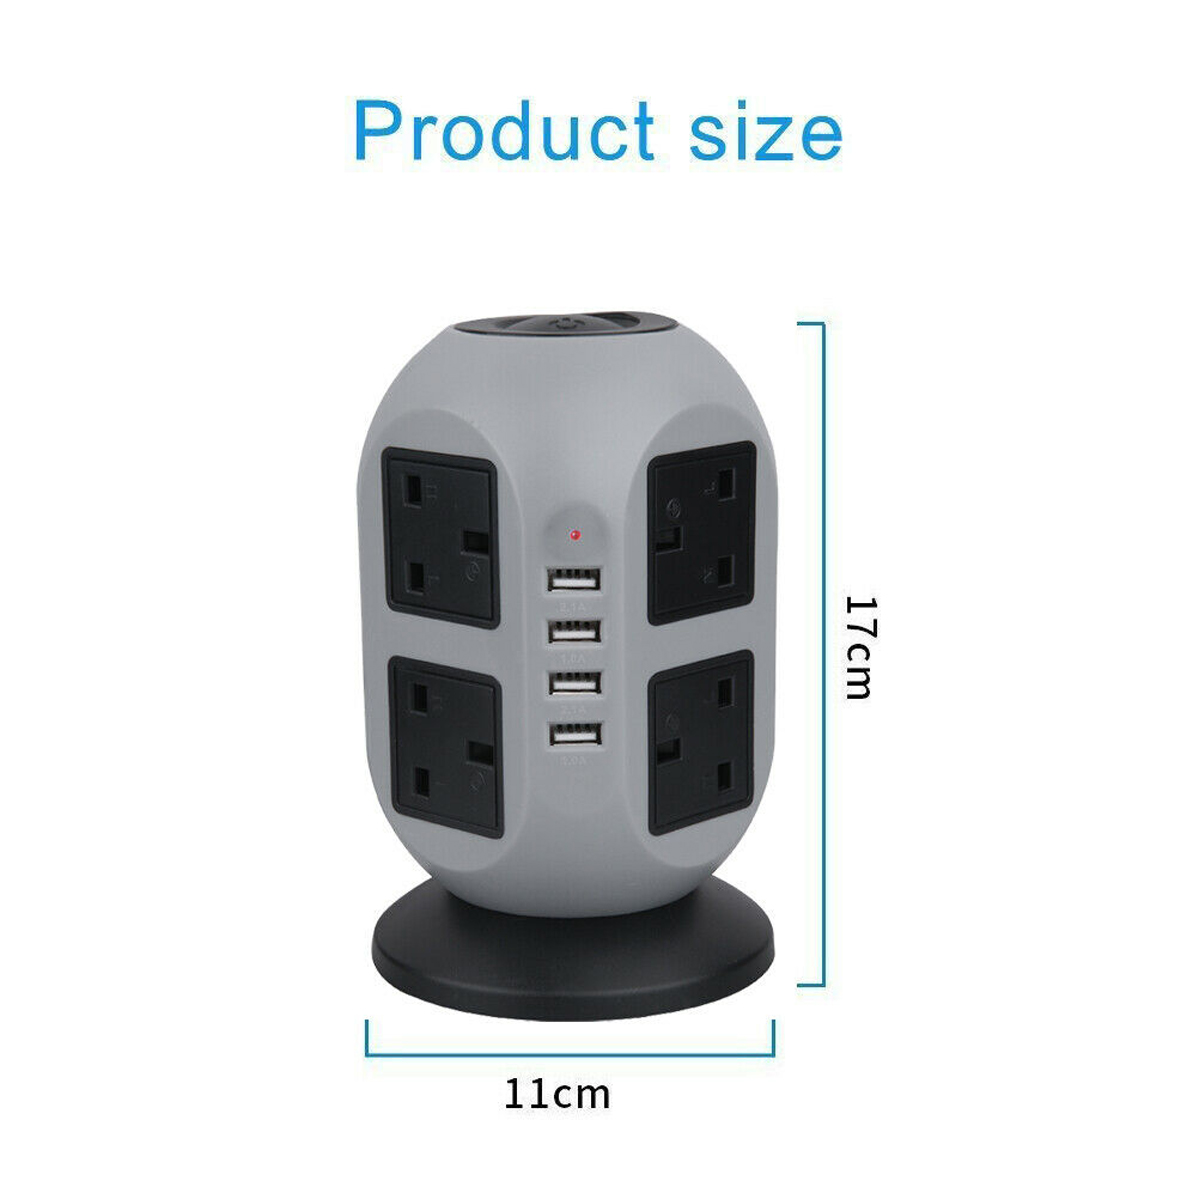 3M-Extension-Lead-Cable-Surge-Protected-Tower-Power-Socket-with-8Way-4-USB-1957280-9